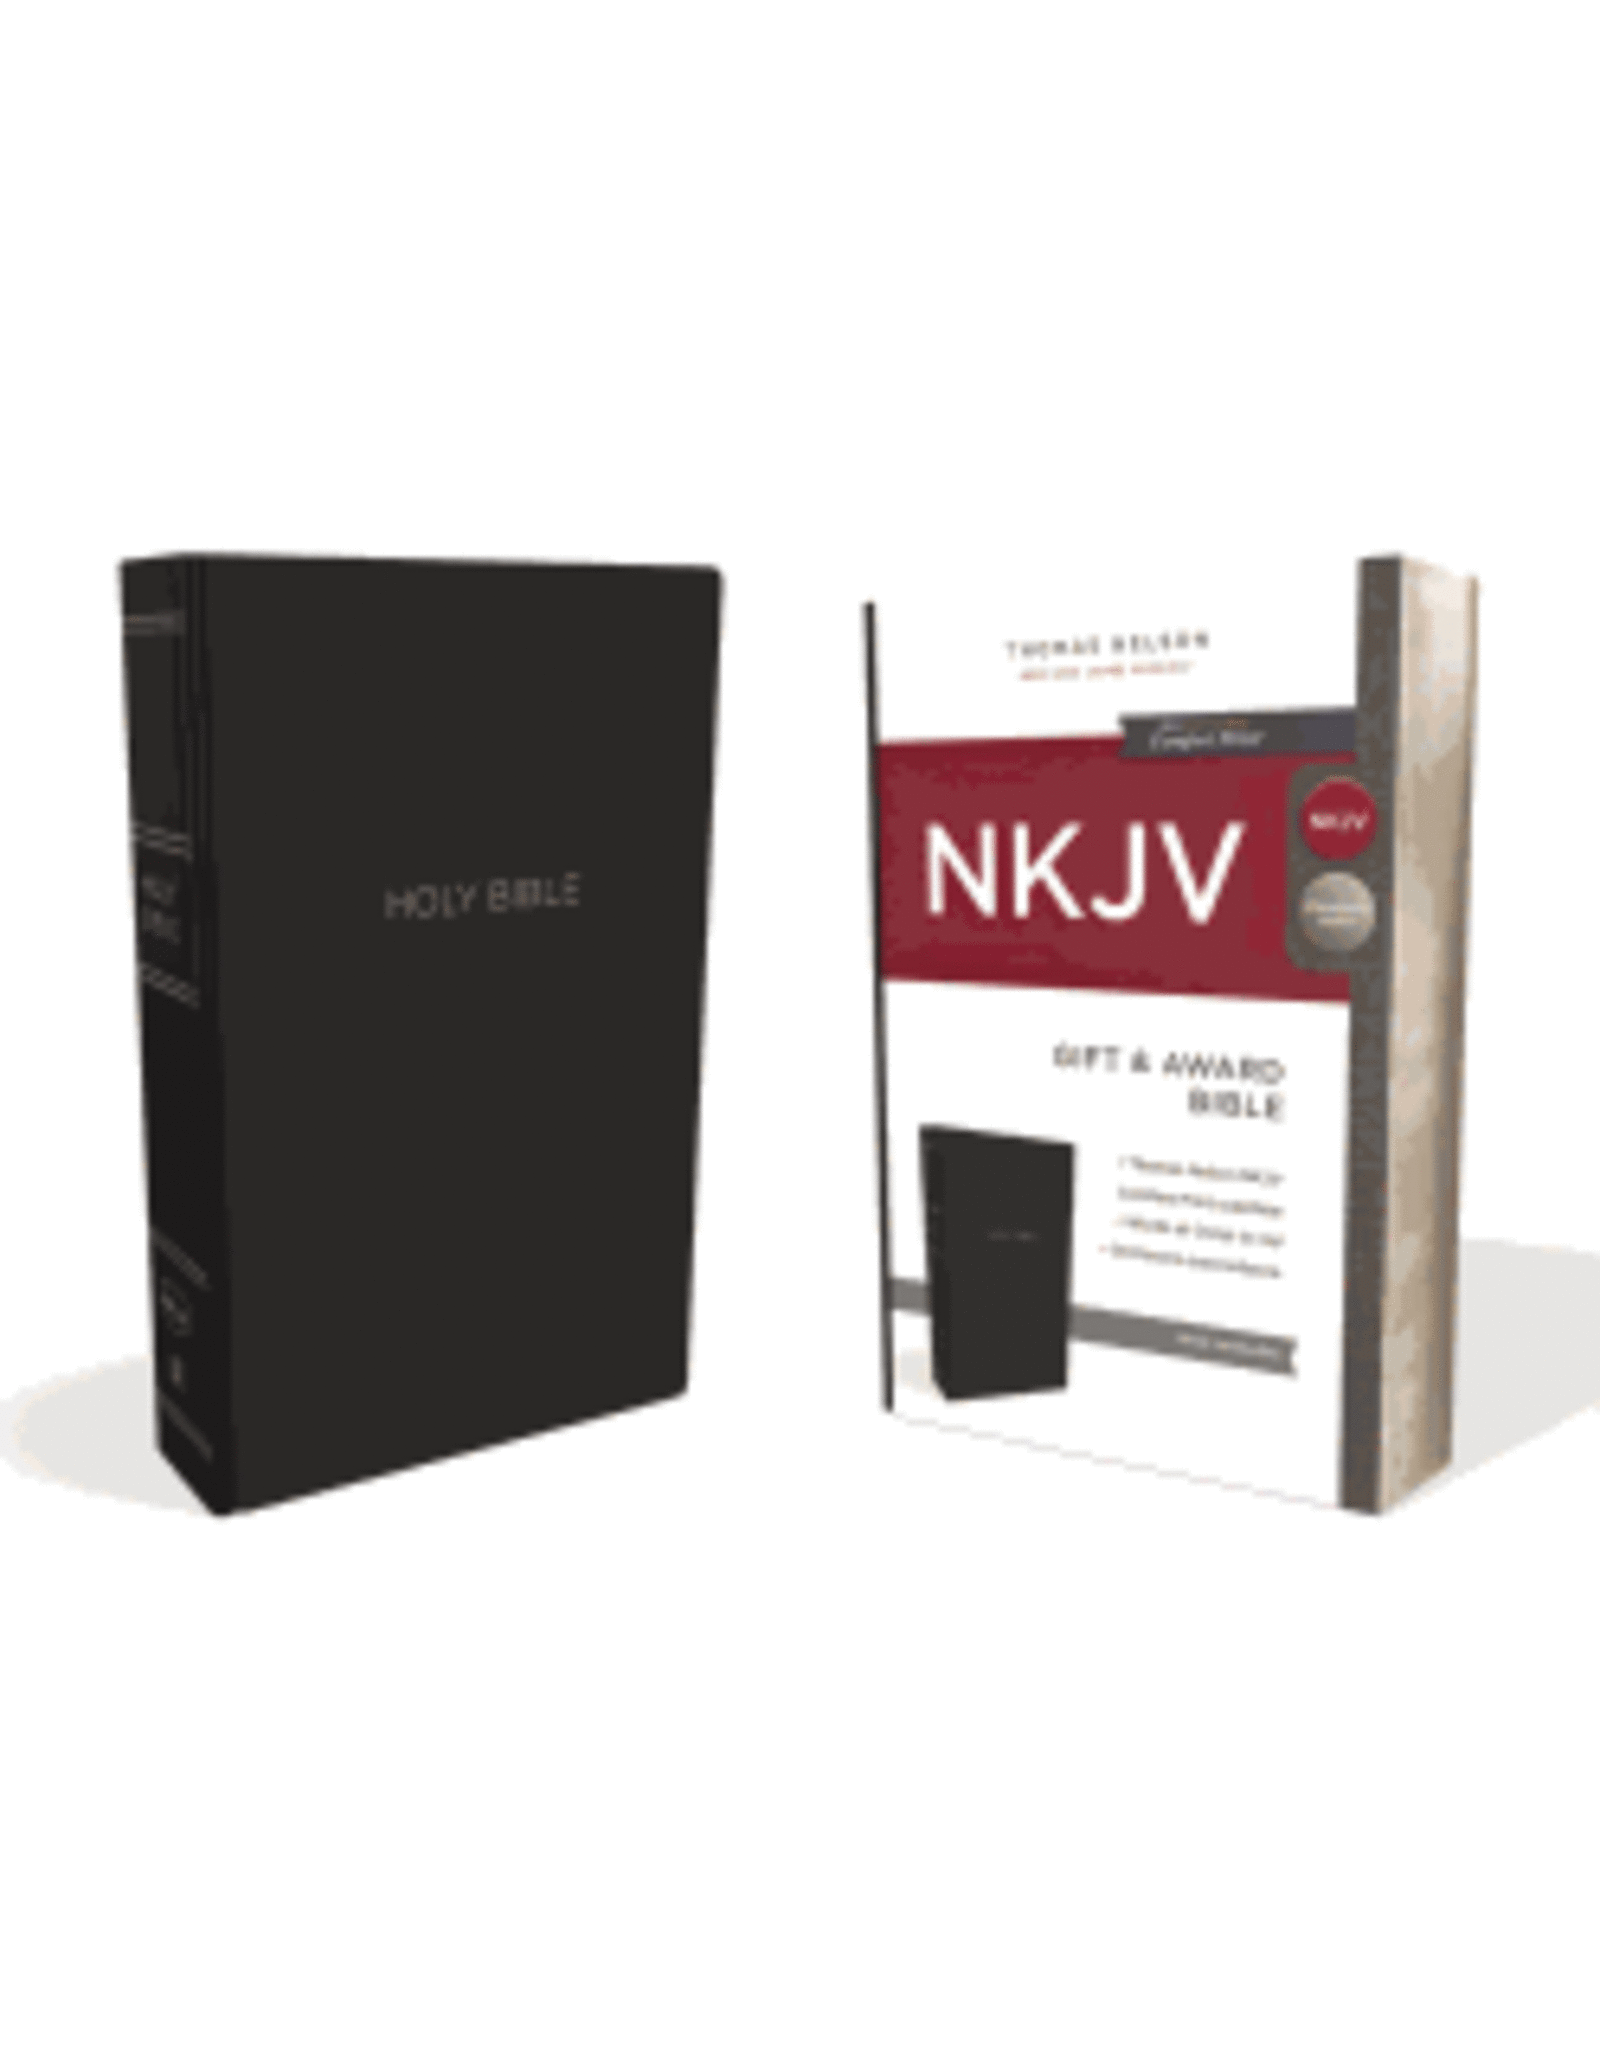 Thomas Nelson NKJV Gift & Award Bible, Leather-Look, Black, Red Letter Edition